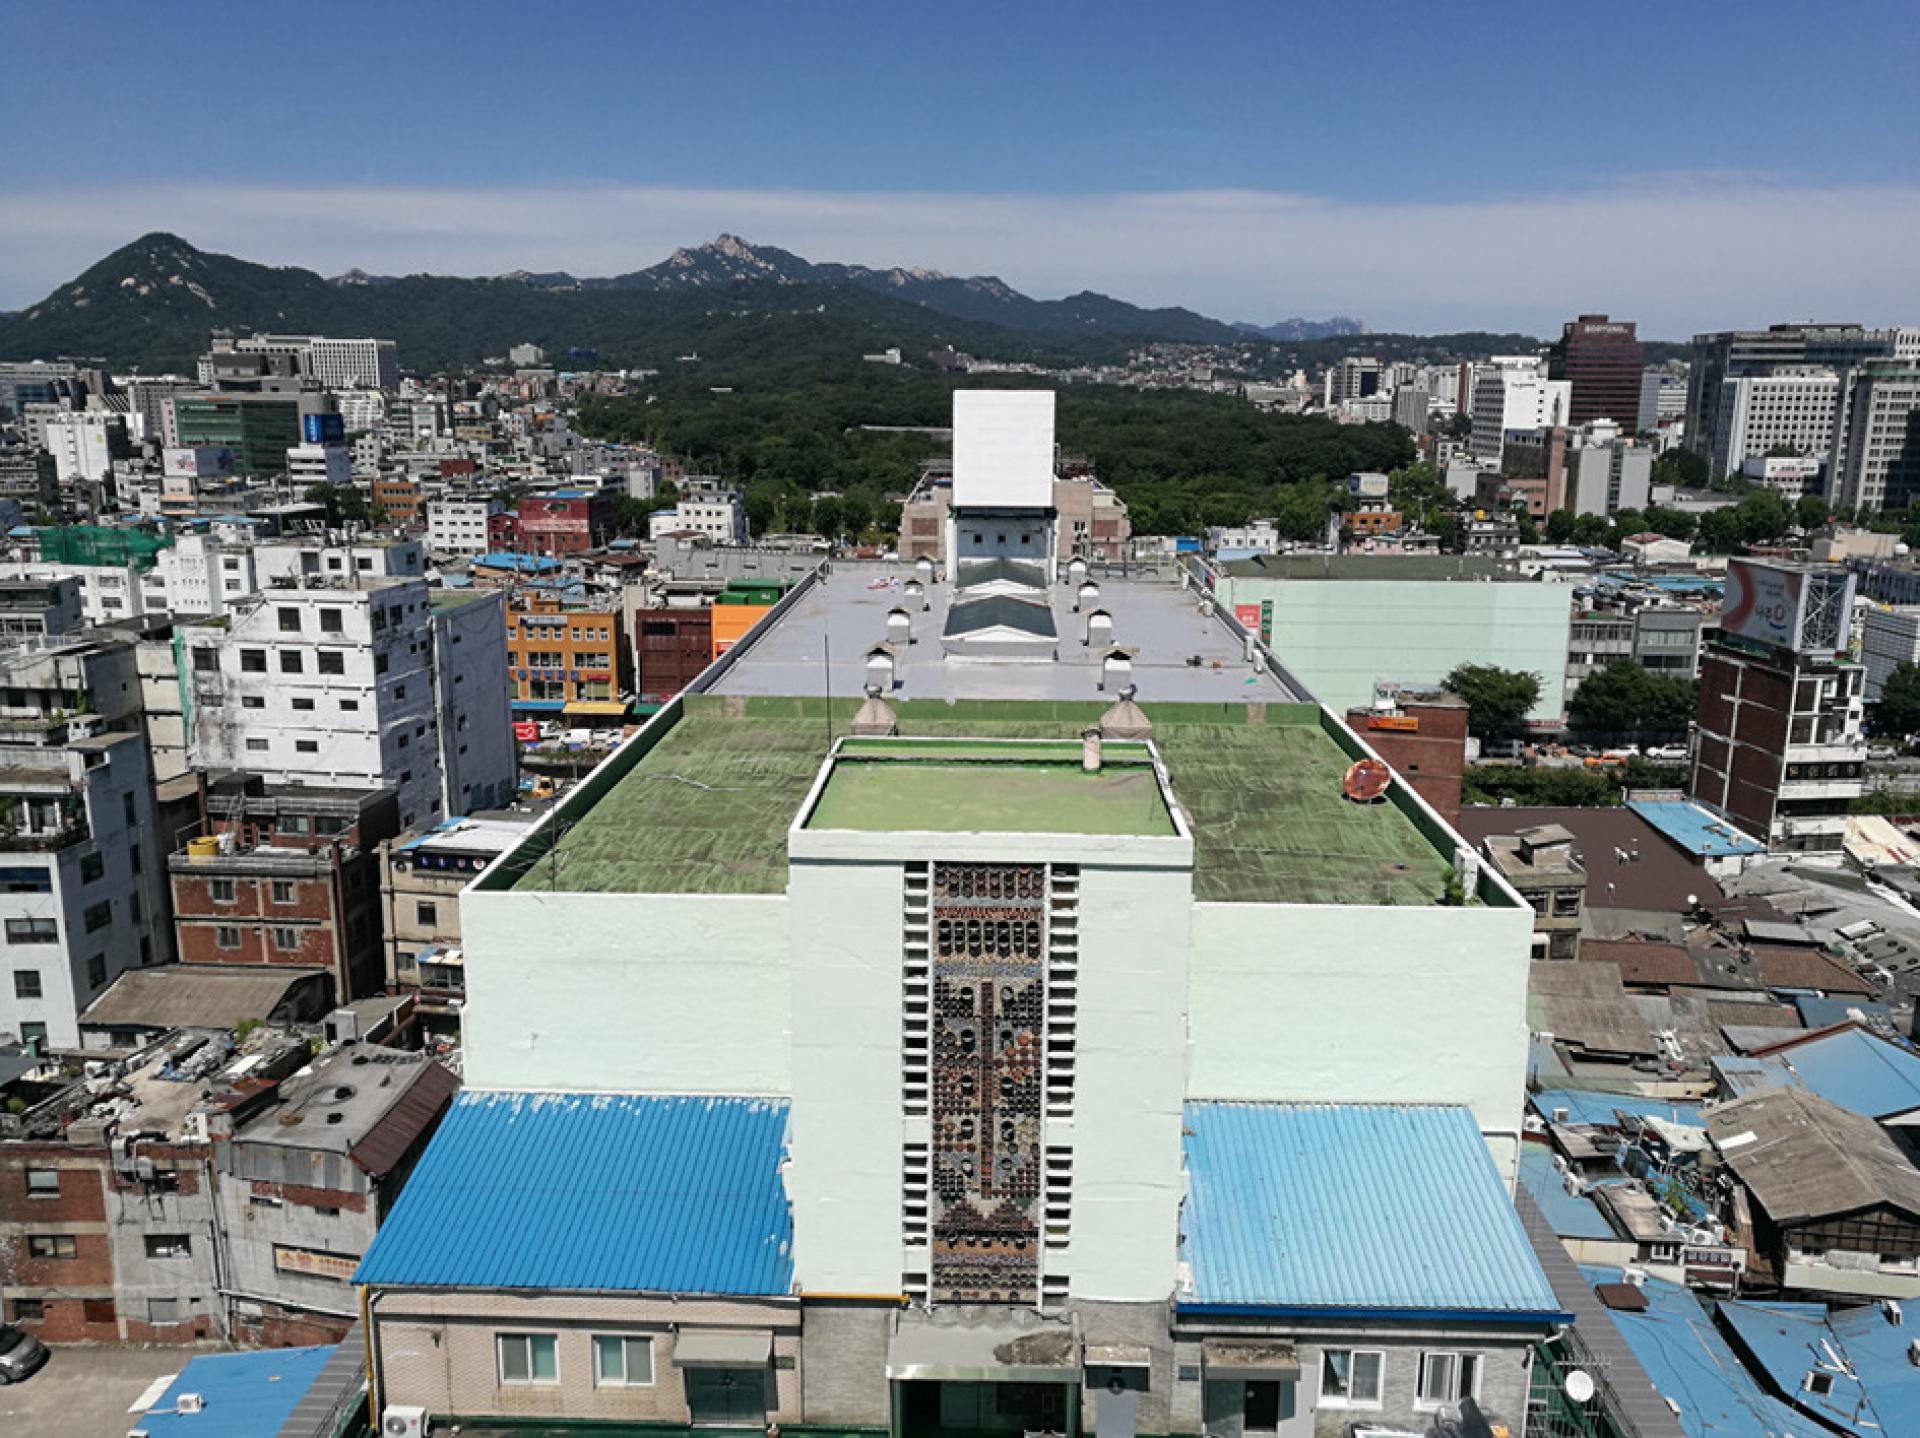 The site of Sewoon Sangga with a view to the mountains in the north